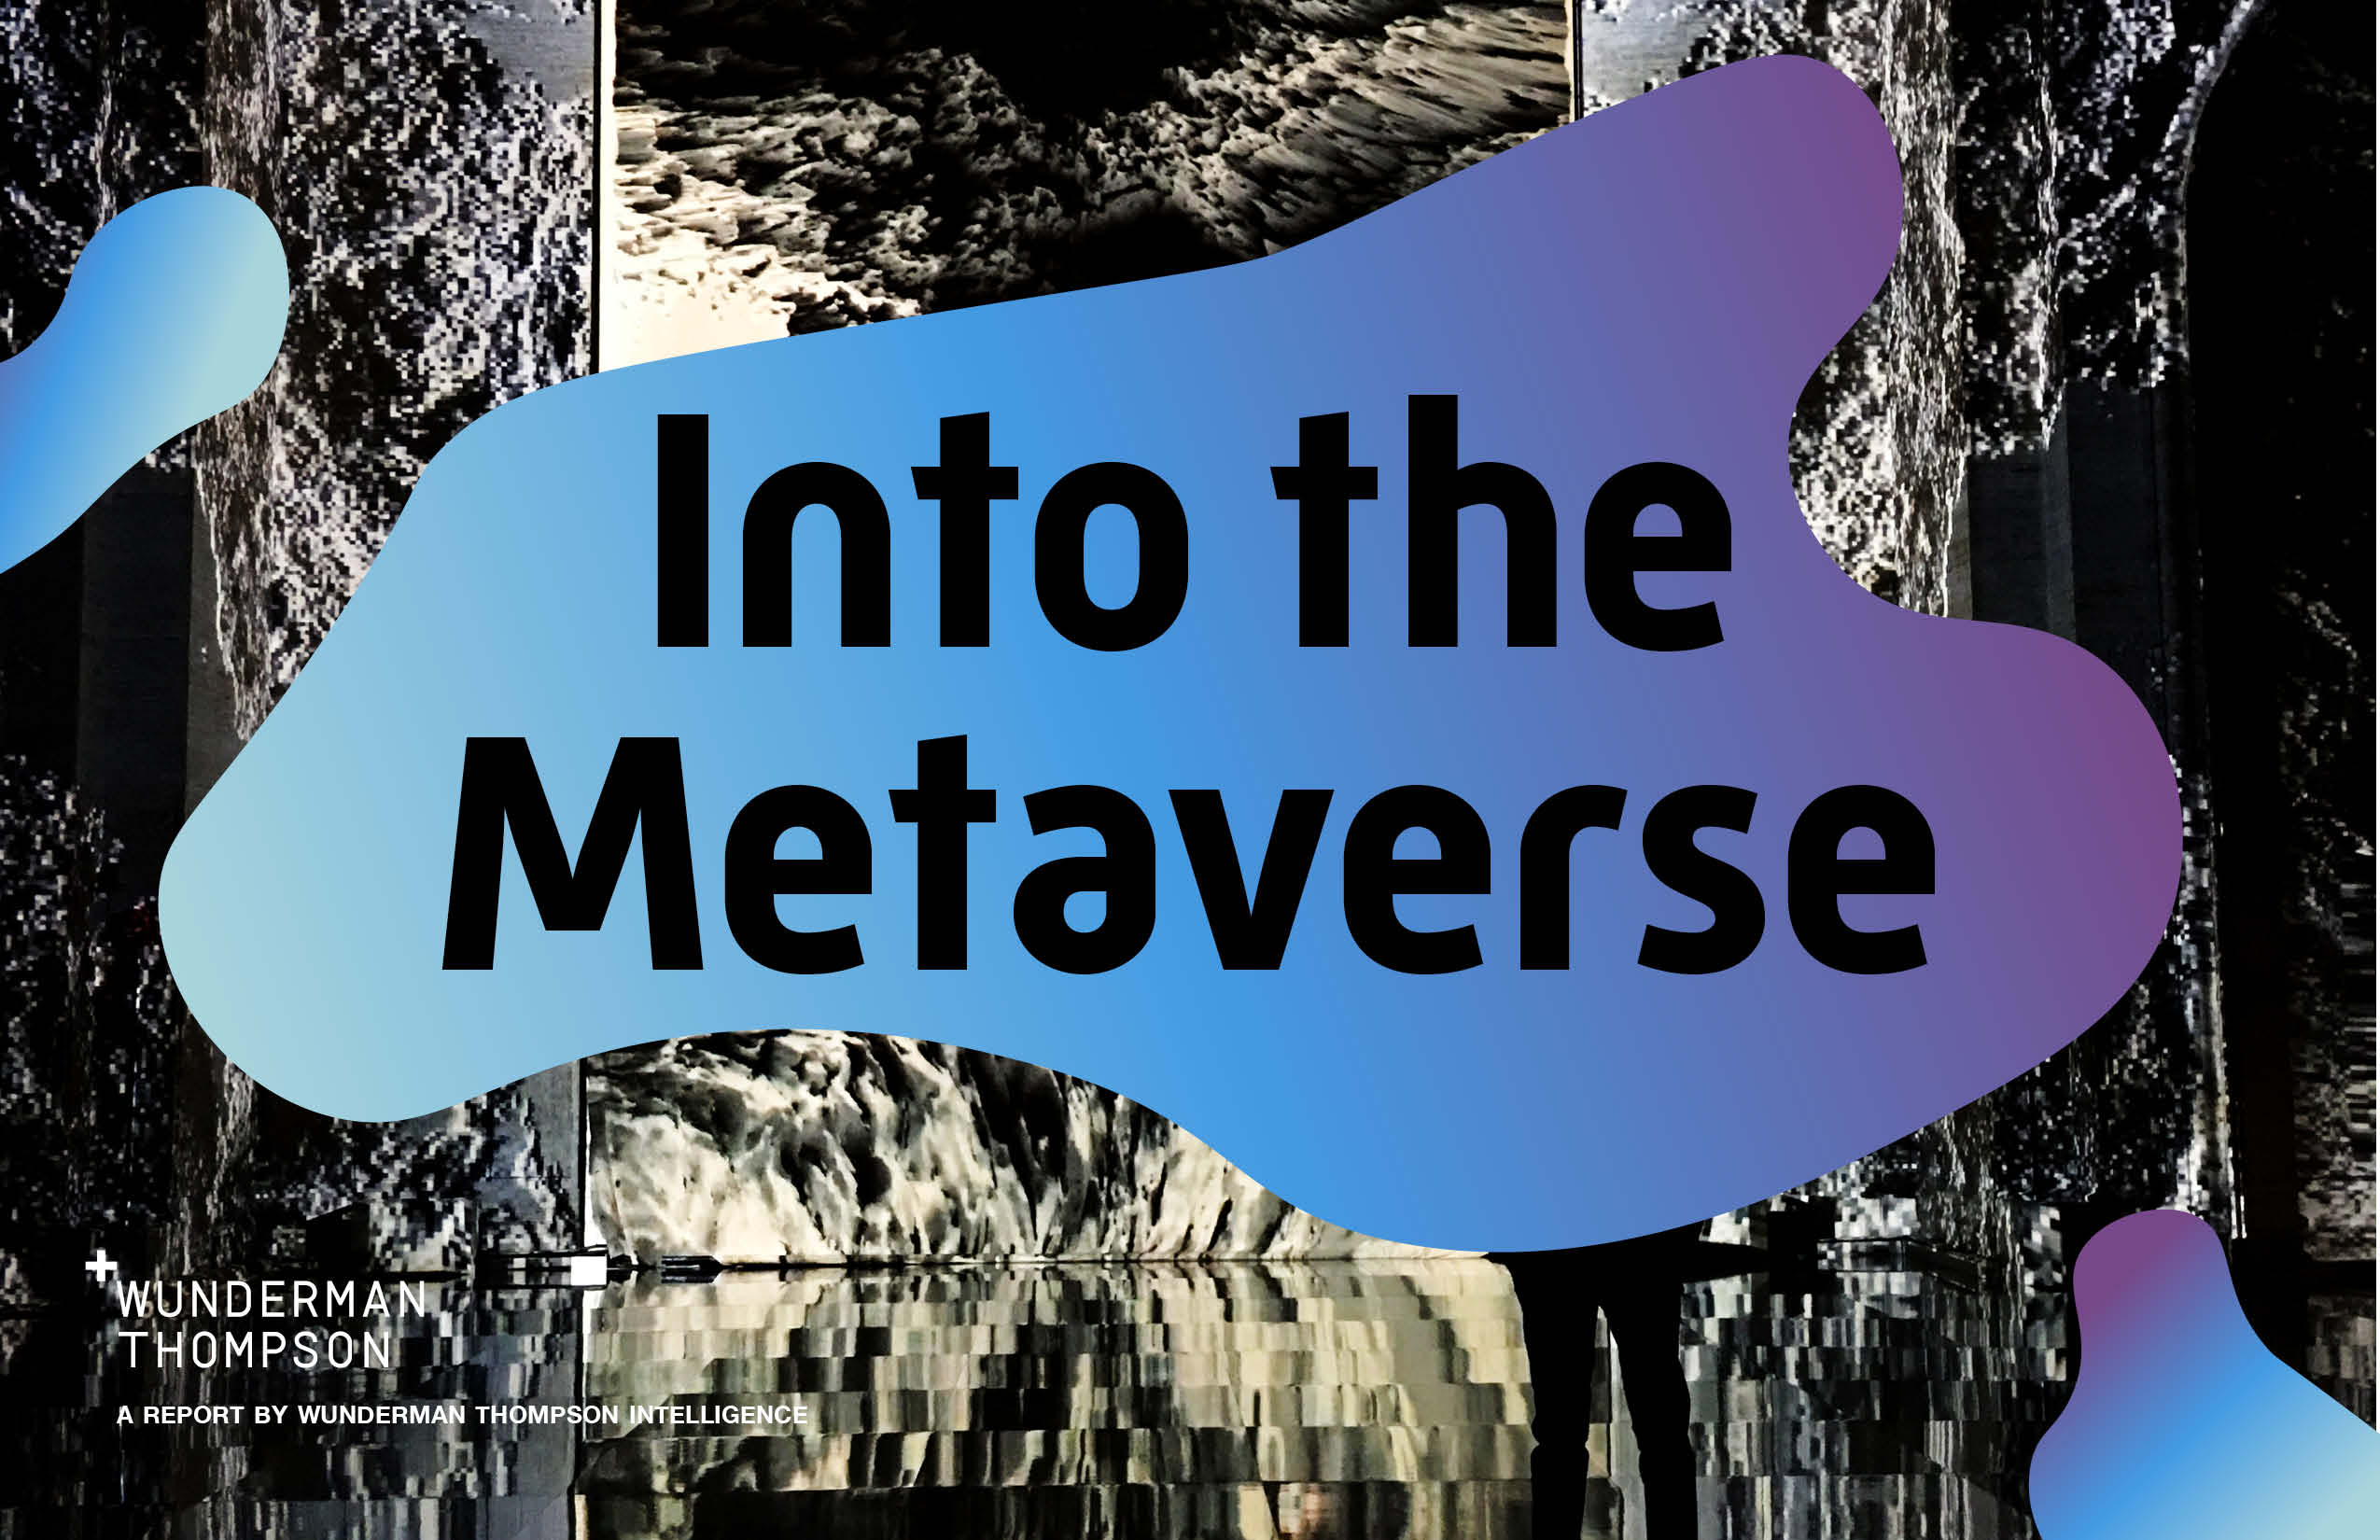 Meaning metaverse What is